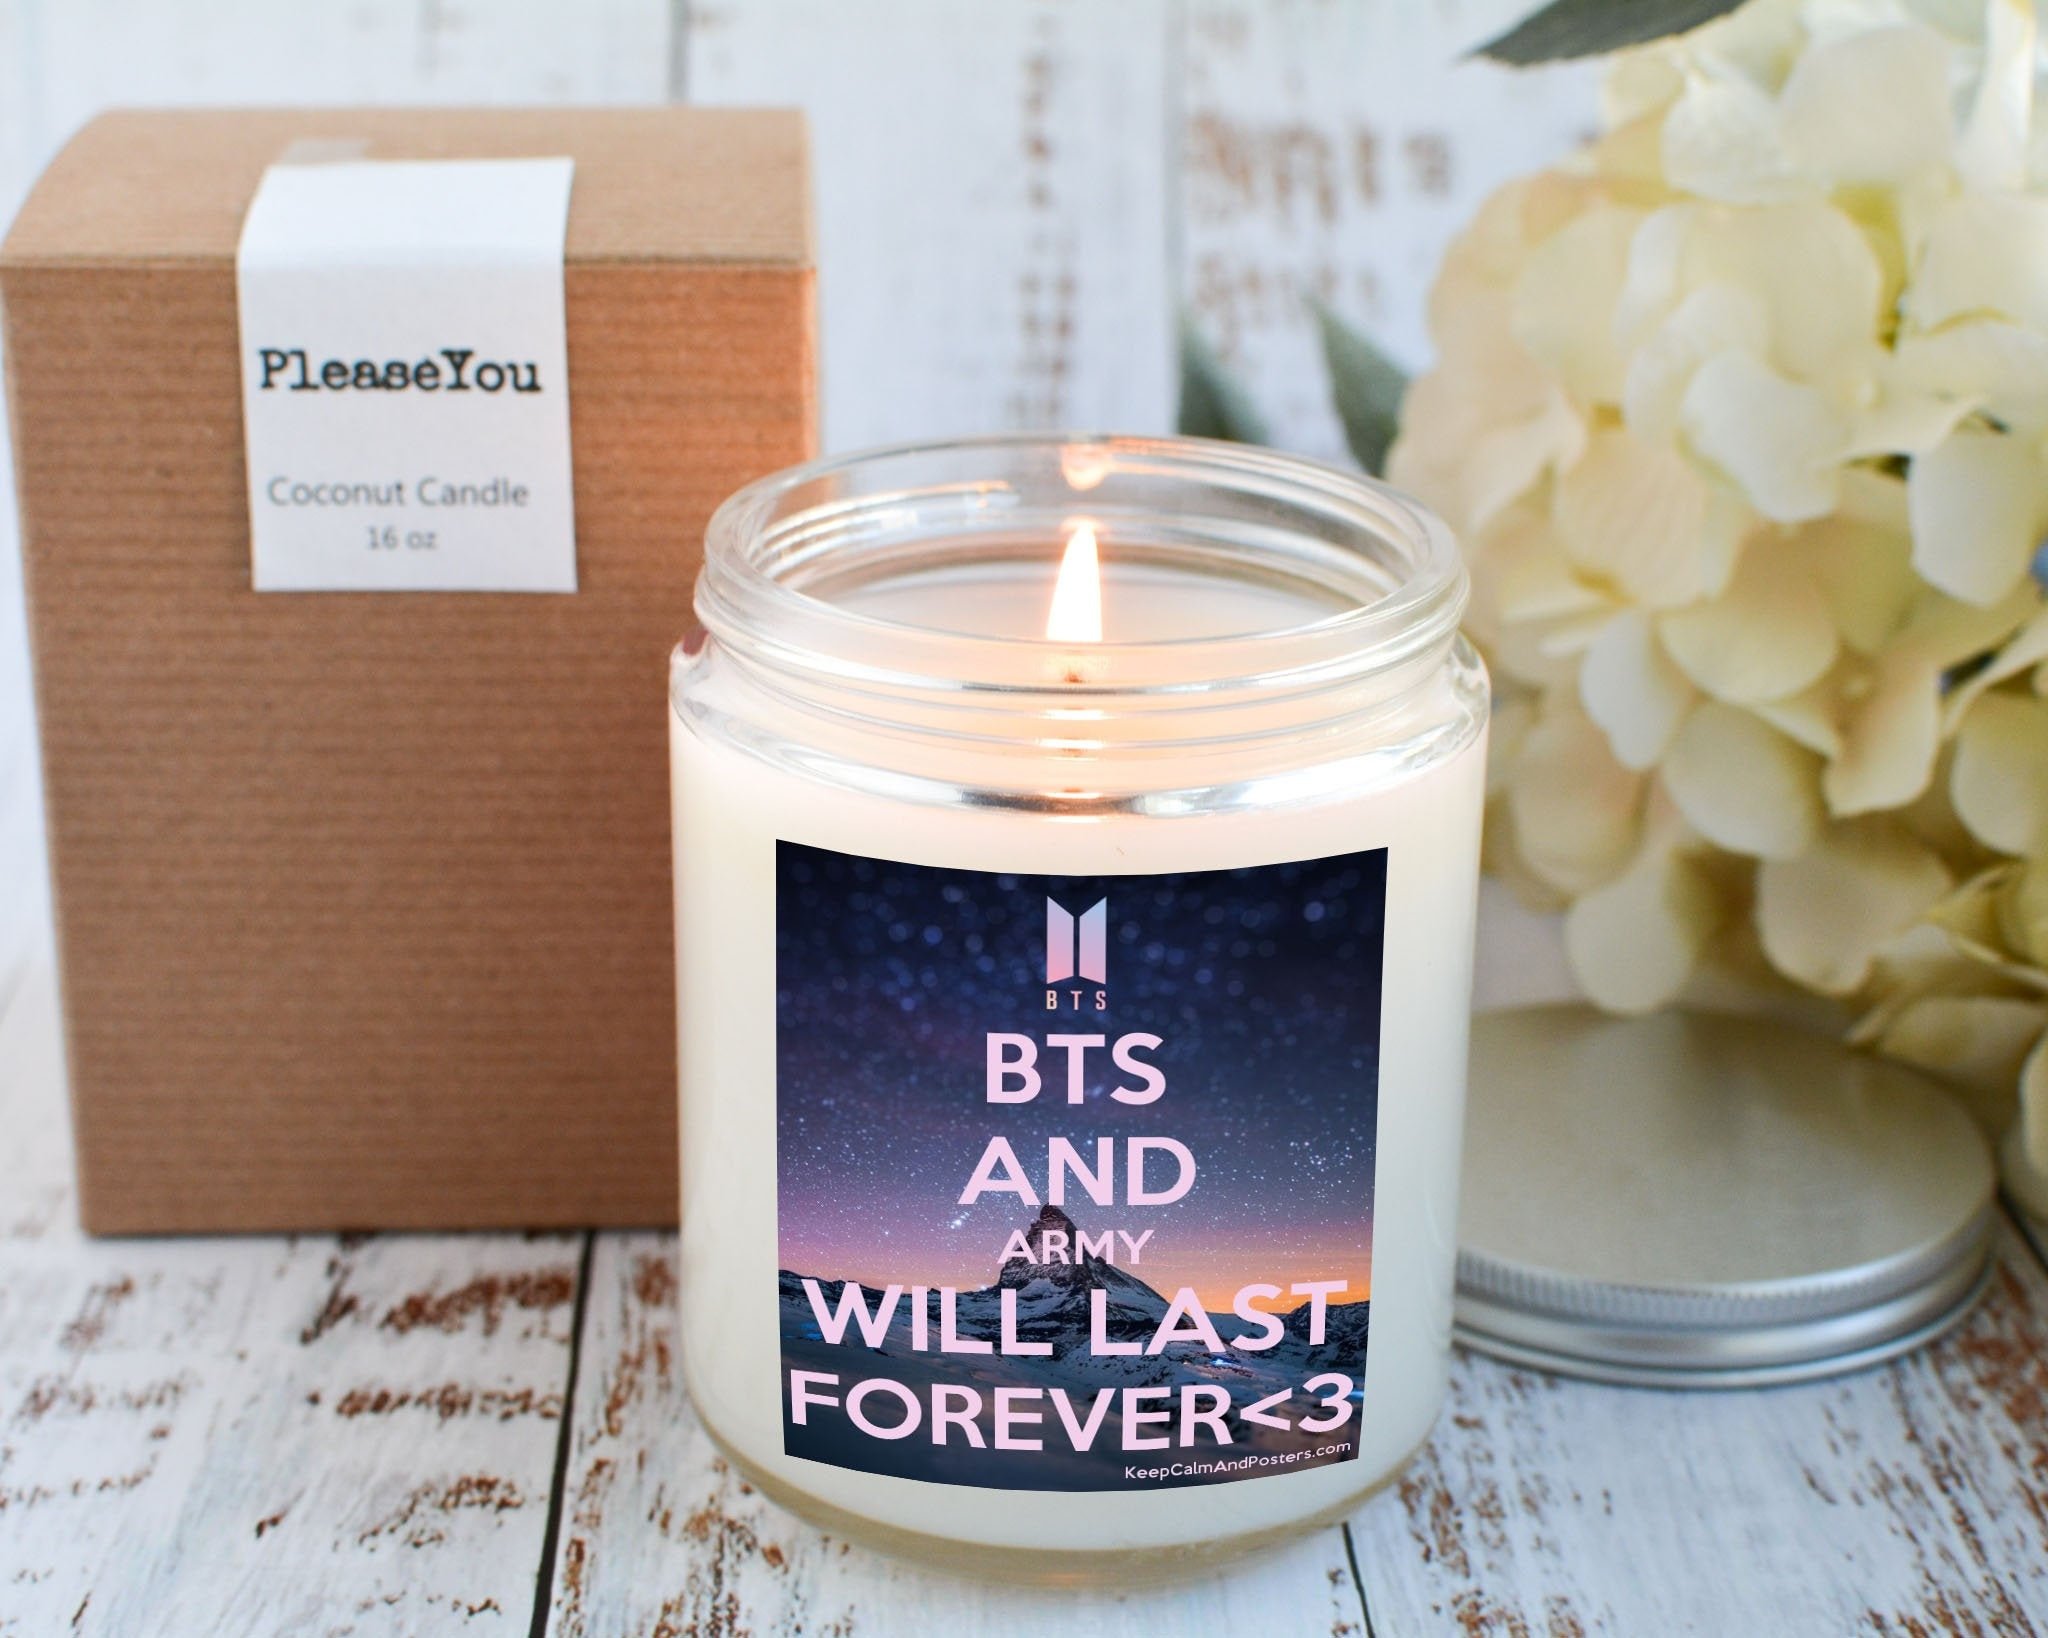 What to gift a bts fan